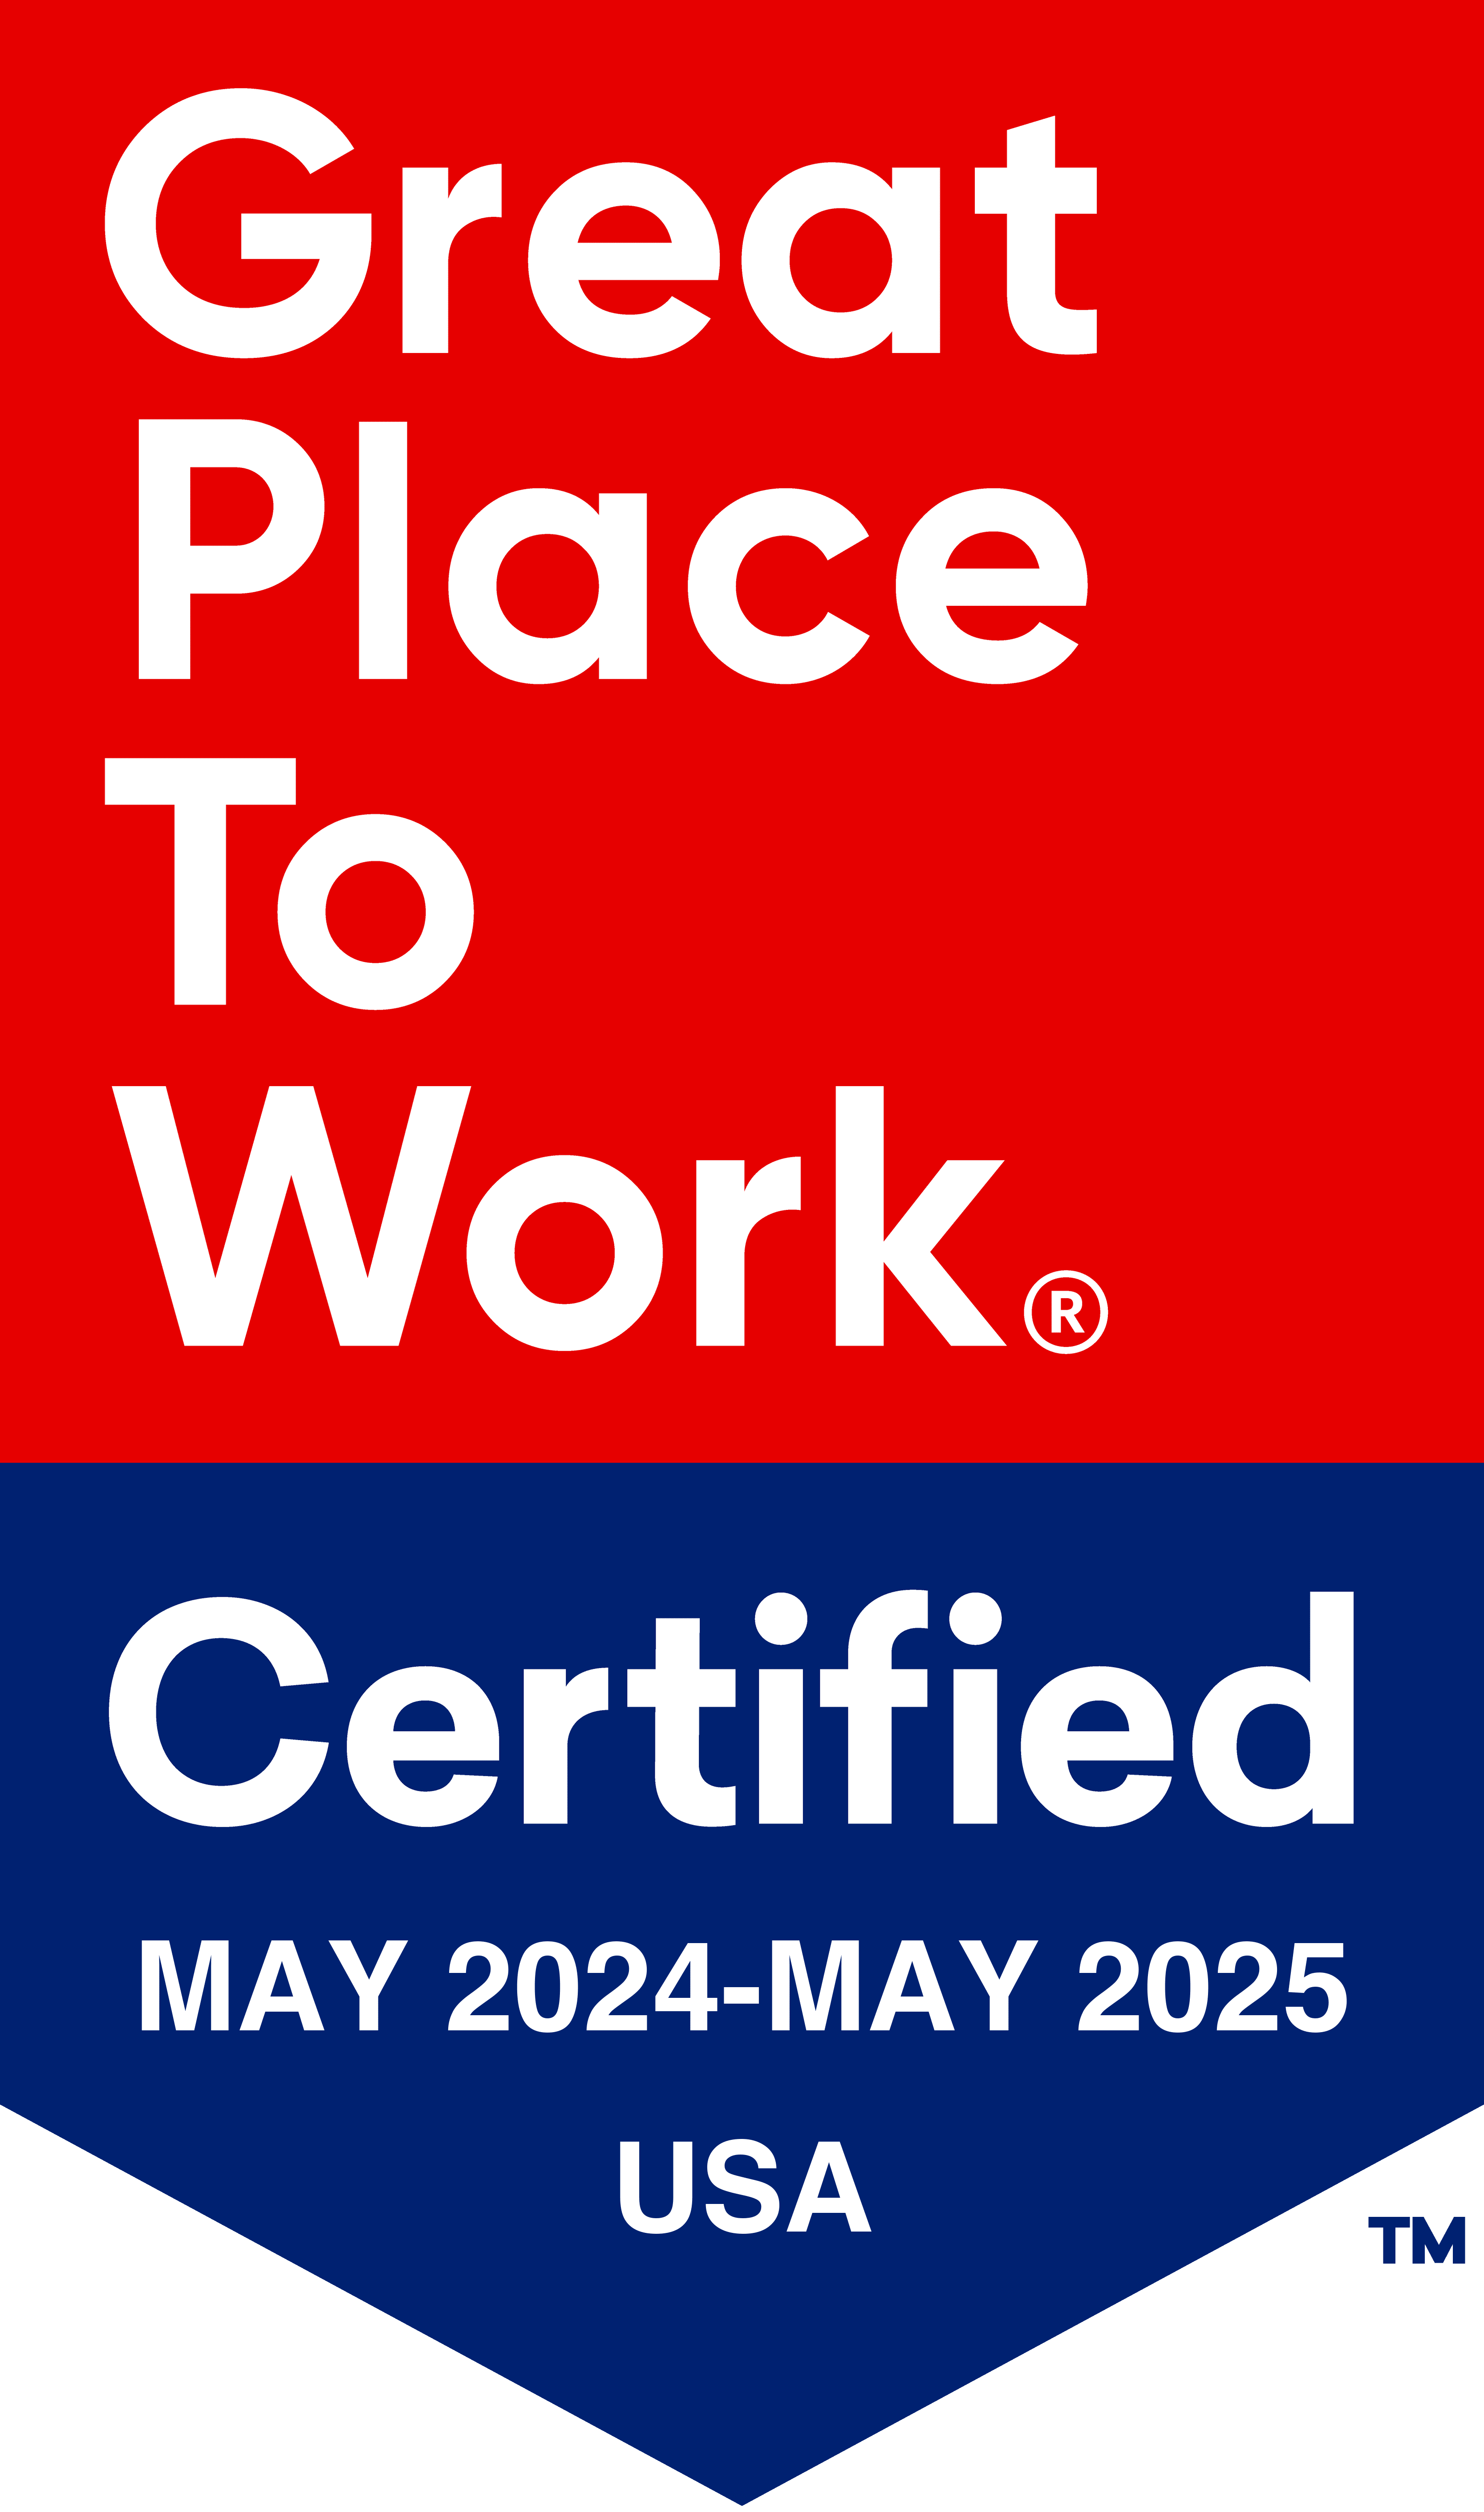 Great place to work logo for Clearwater at The Heights in Houston, Texas